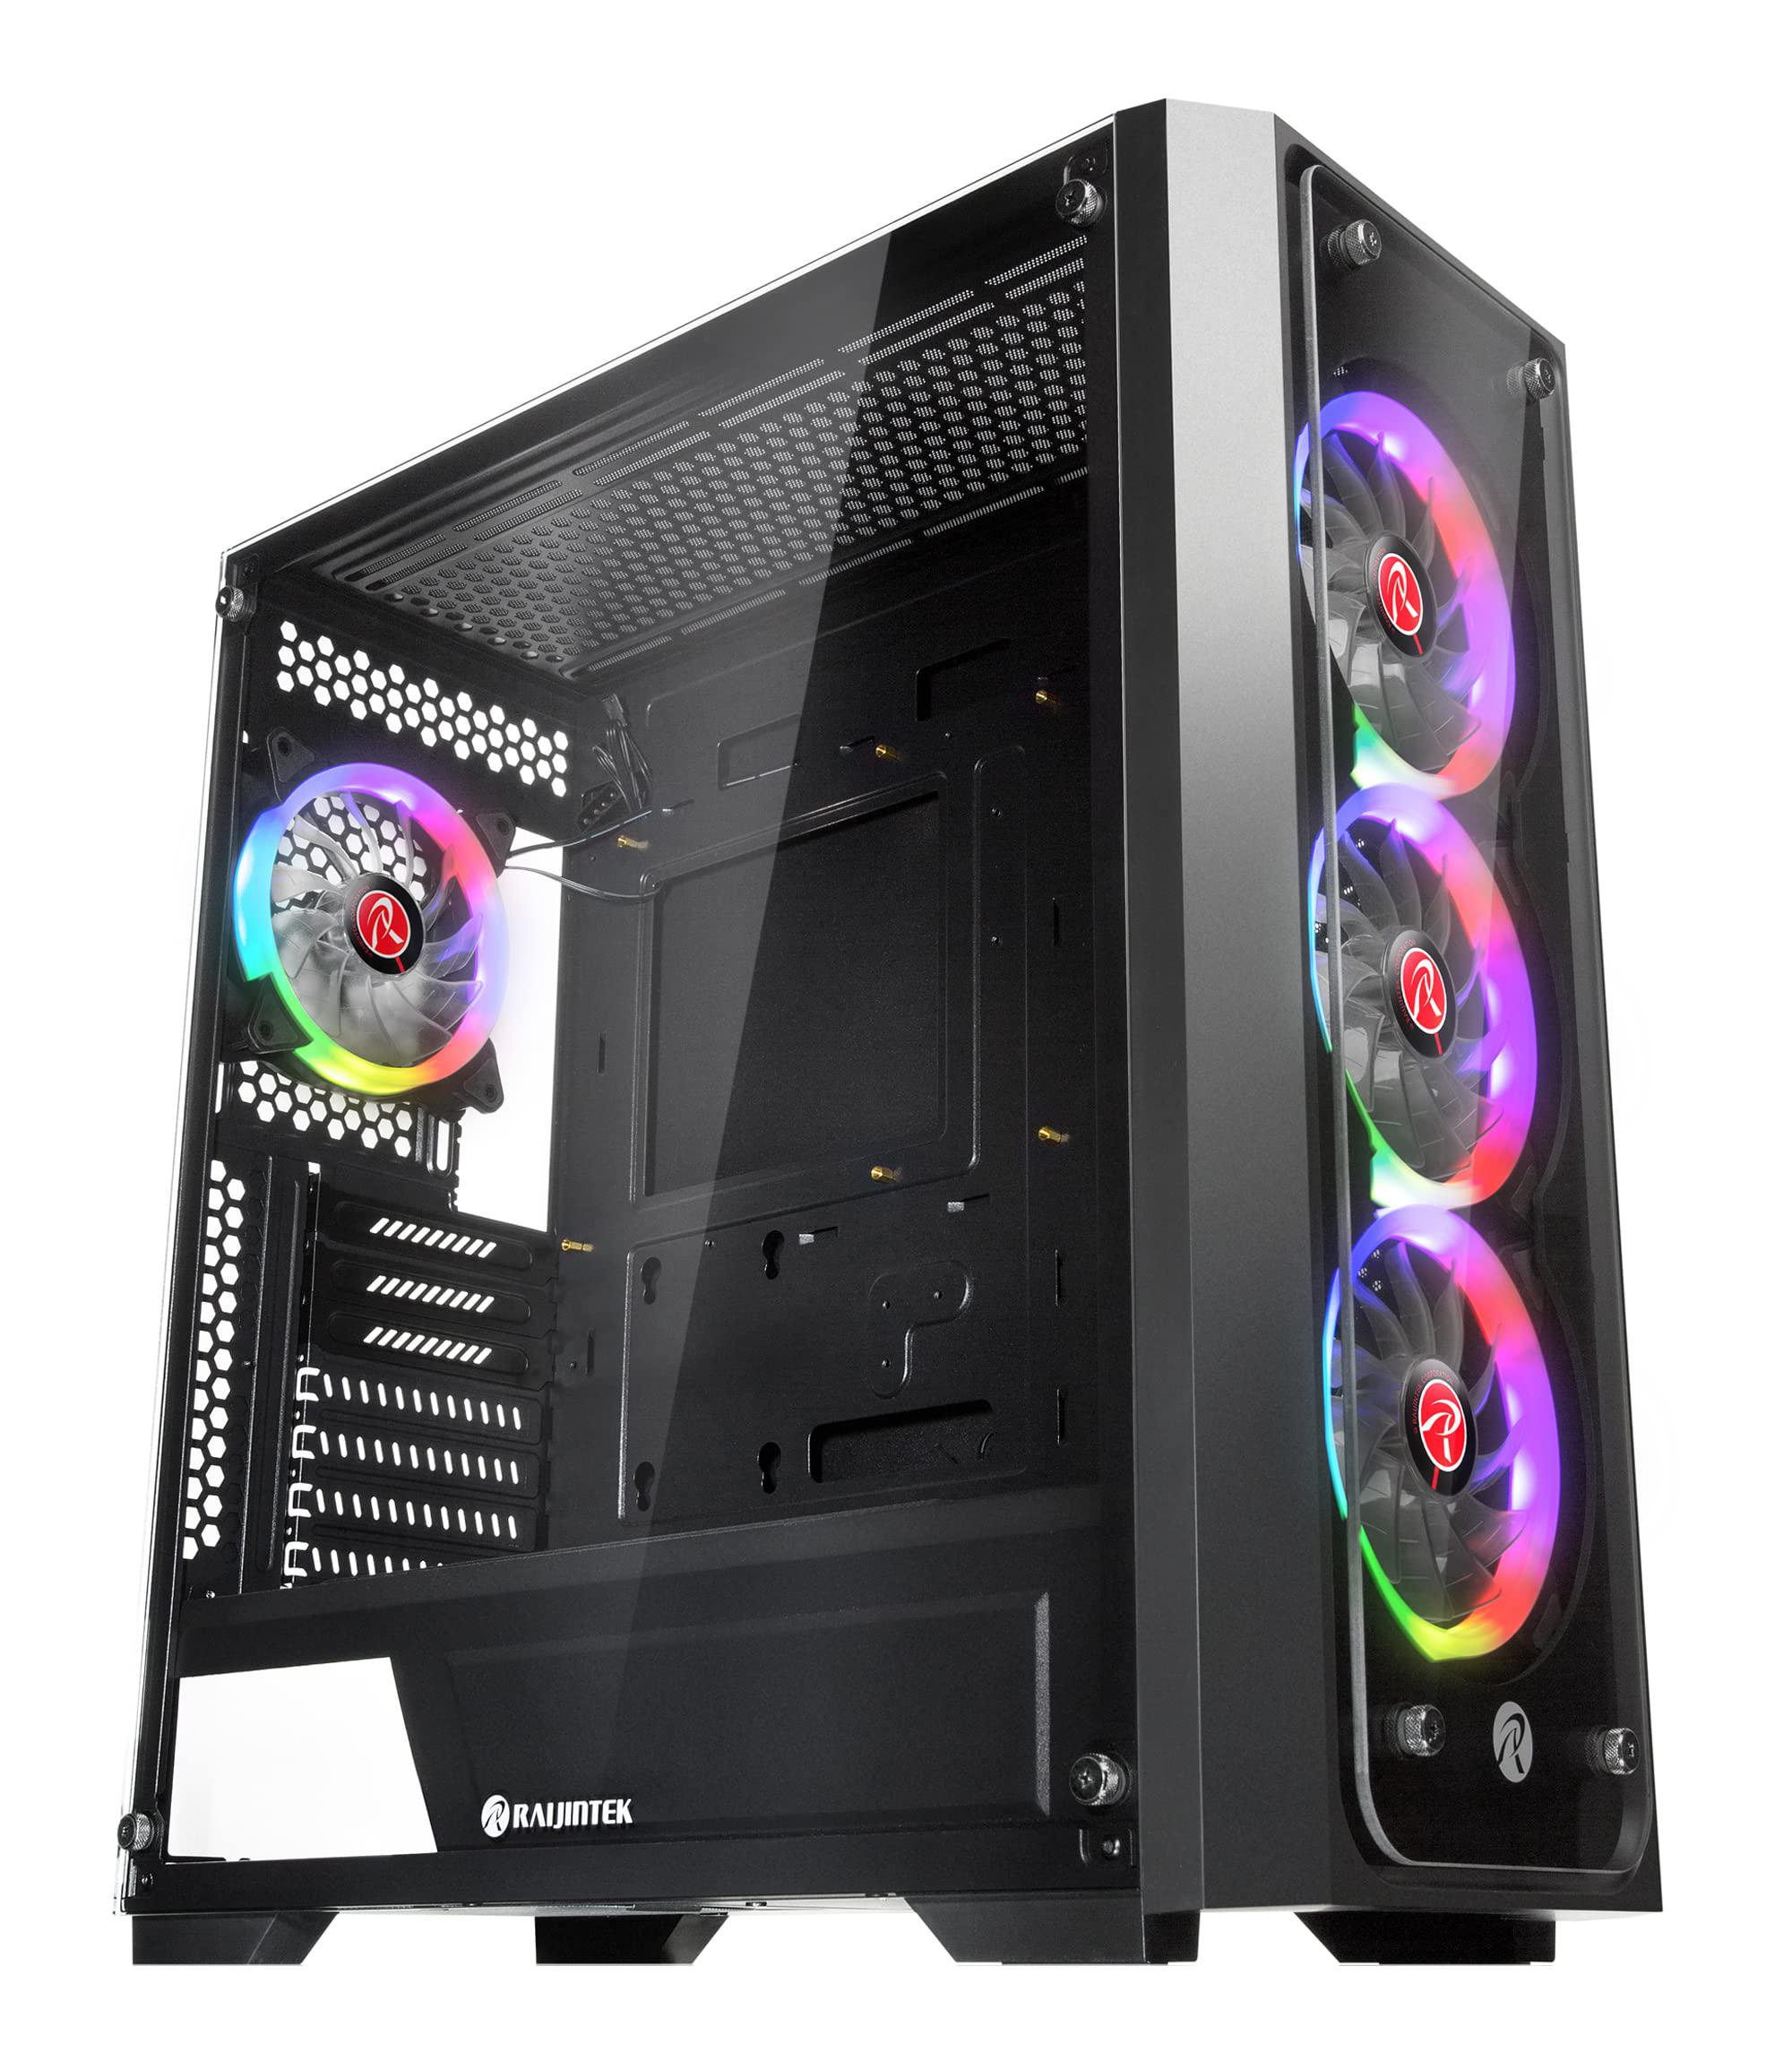 raijintek ponos tg4, mid-tower pc case, with tempered glass (front & side), eeb m/b, comes with 4pcs 12025 argb fans, compati